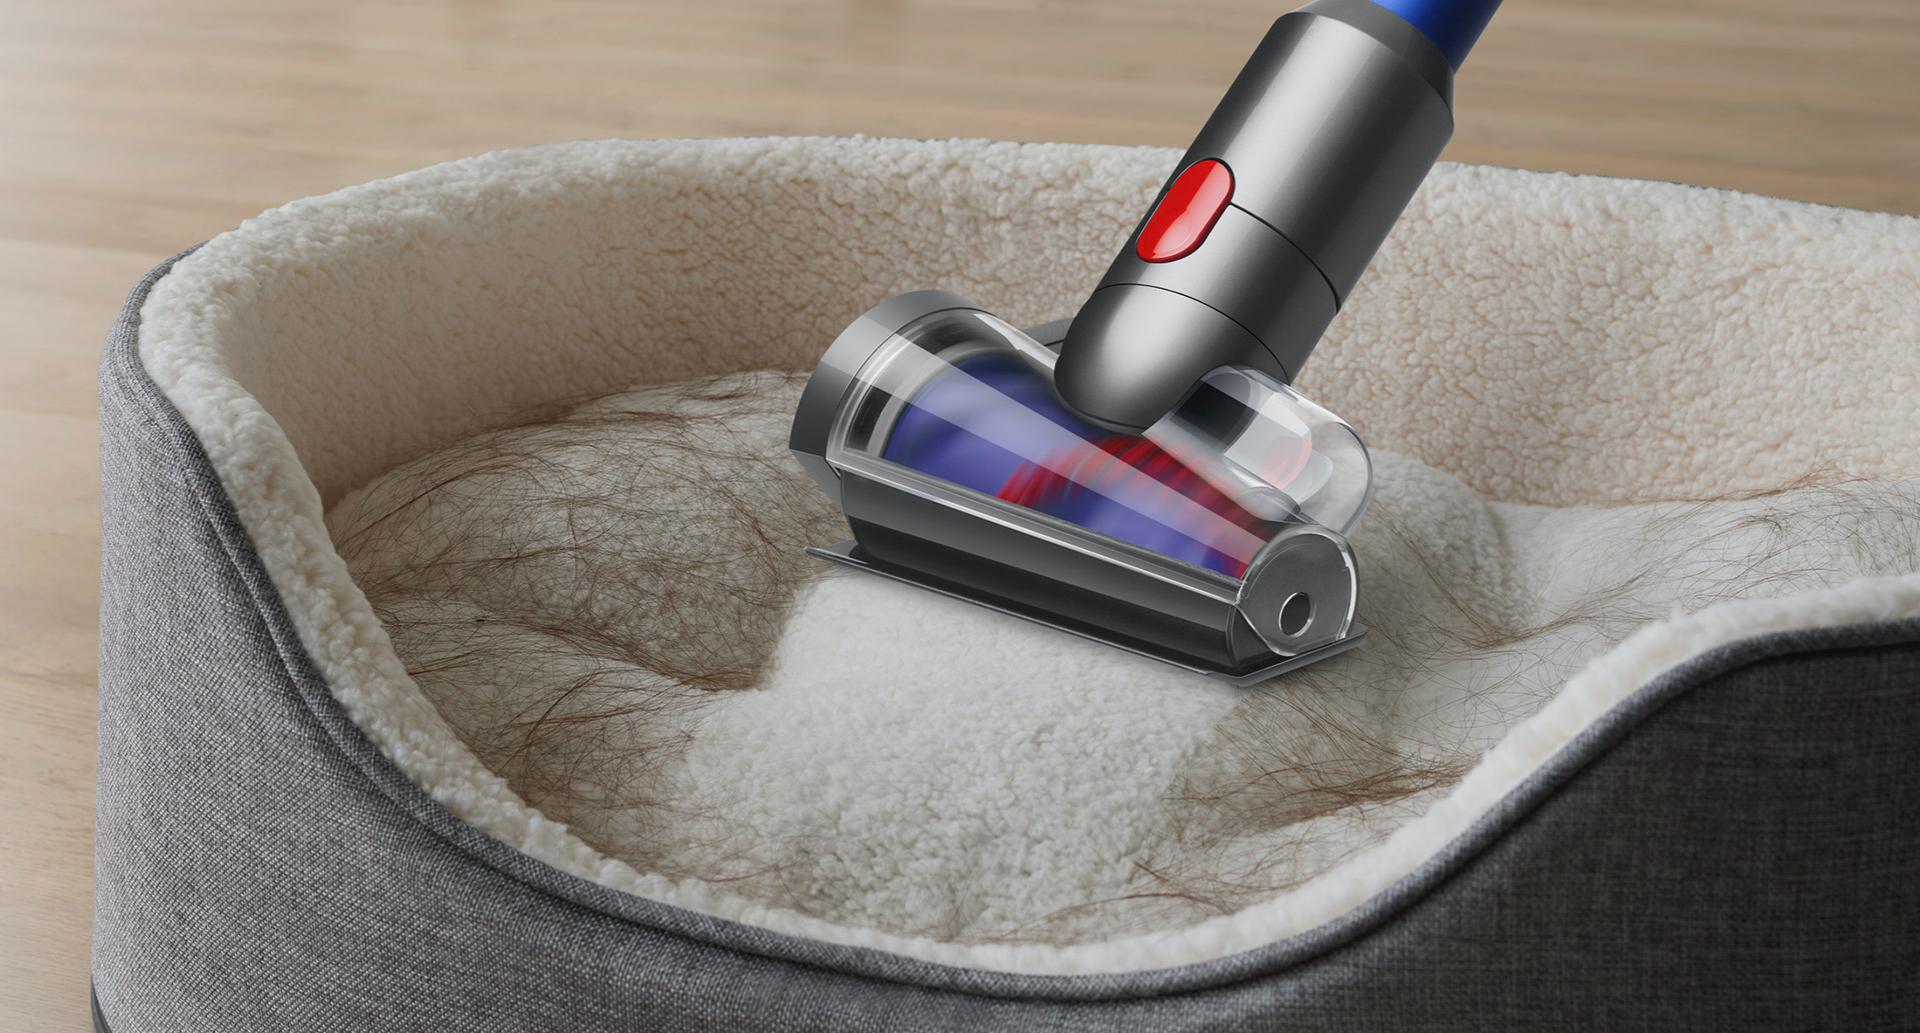 Dyson vacuum cordless stick hair screw tool cleaning pet bed